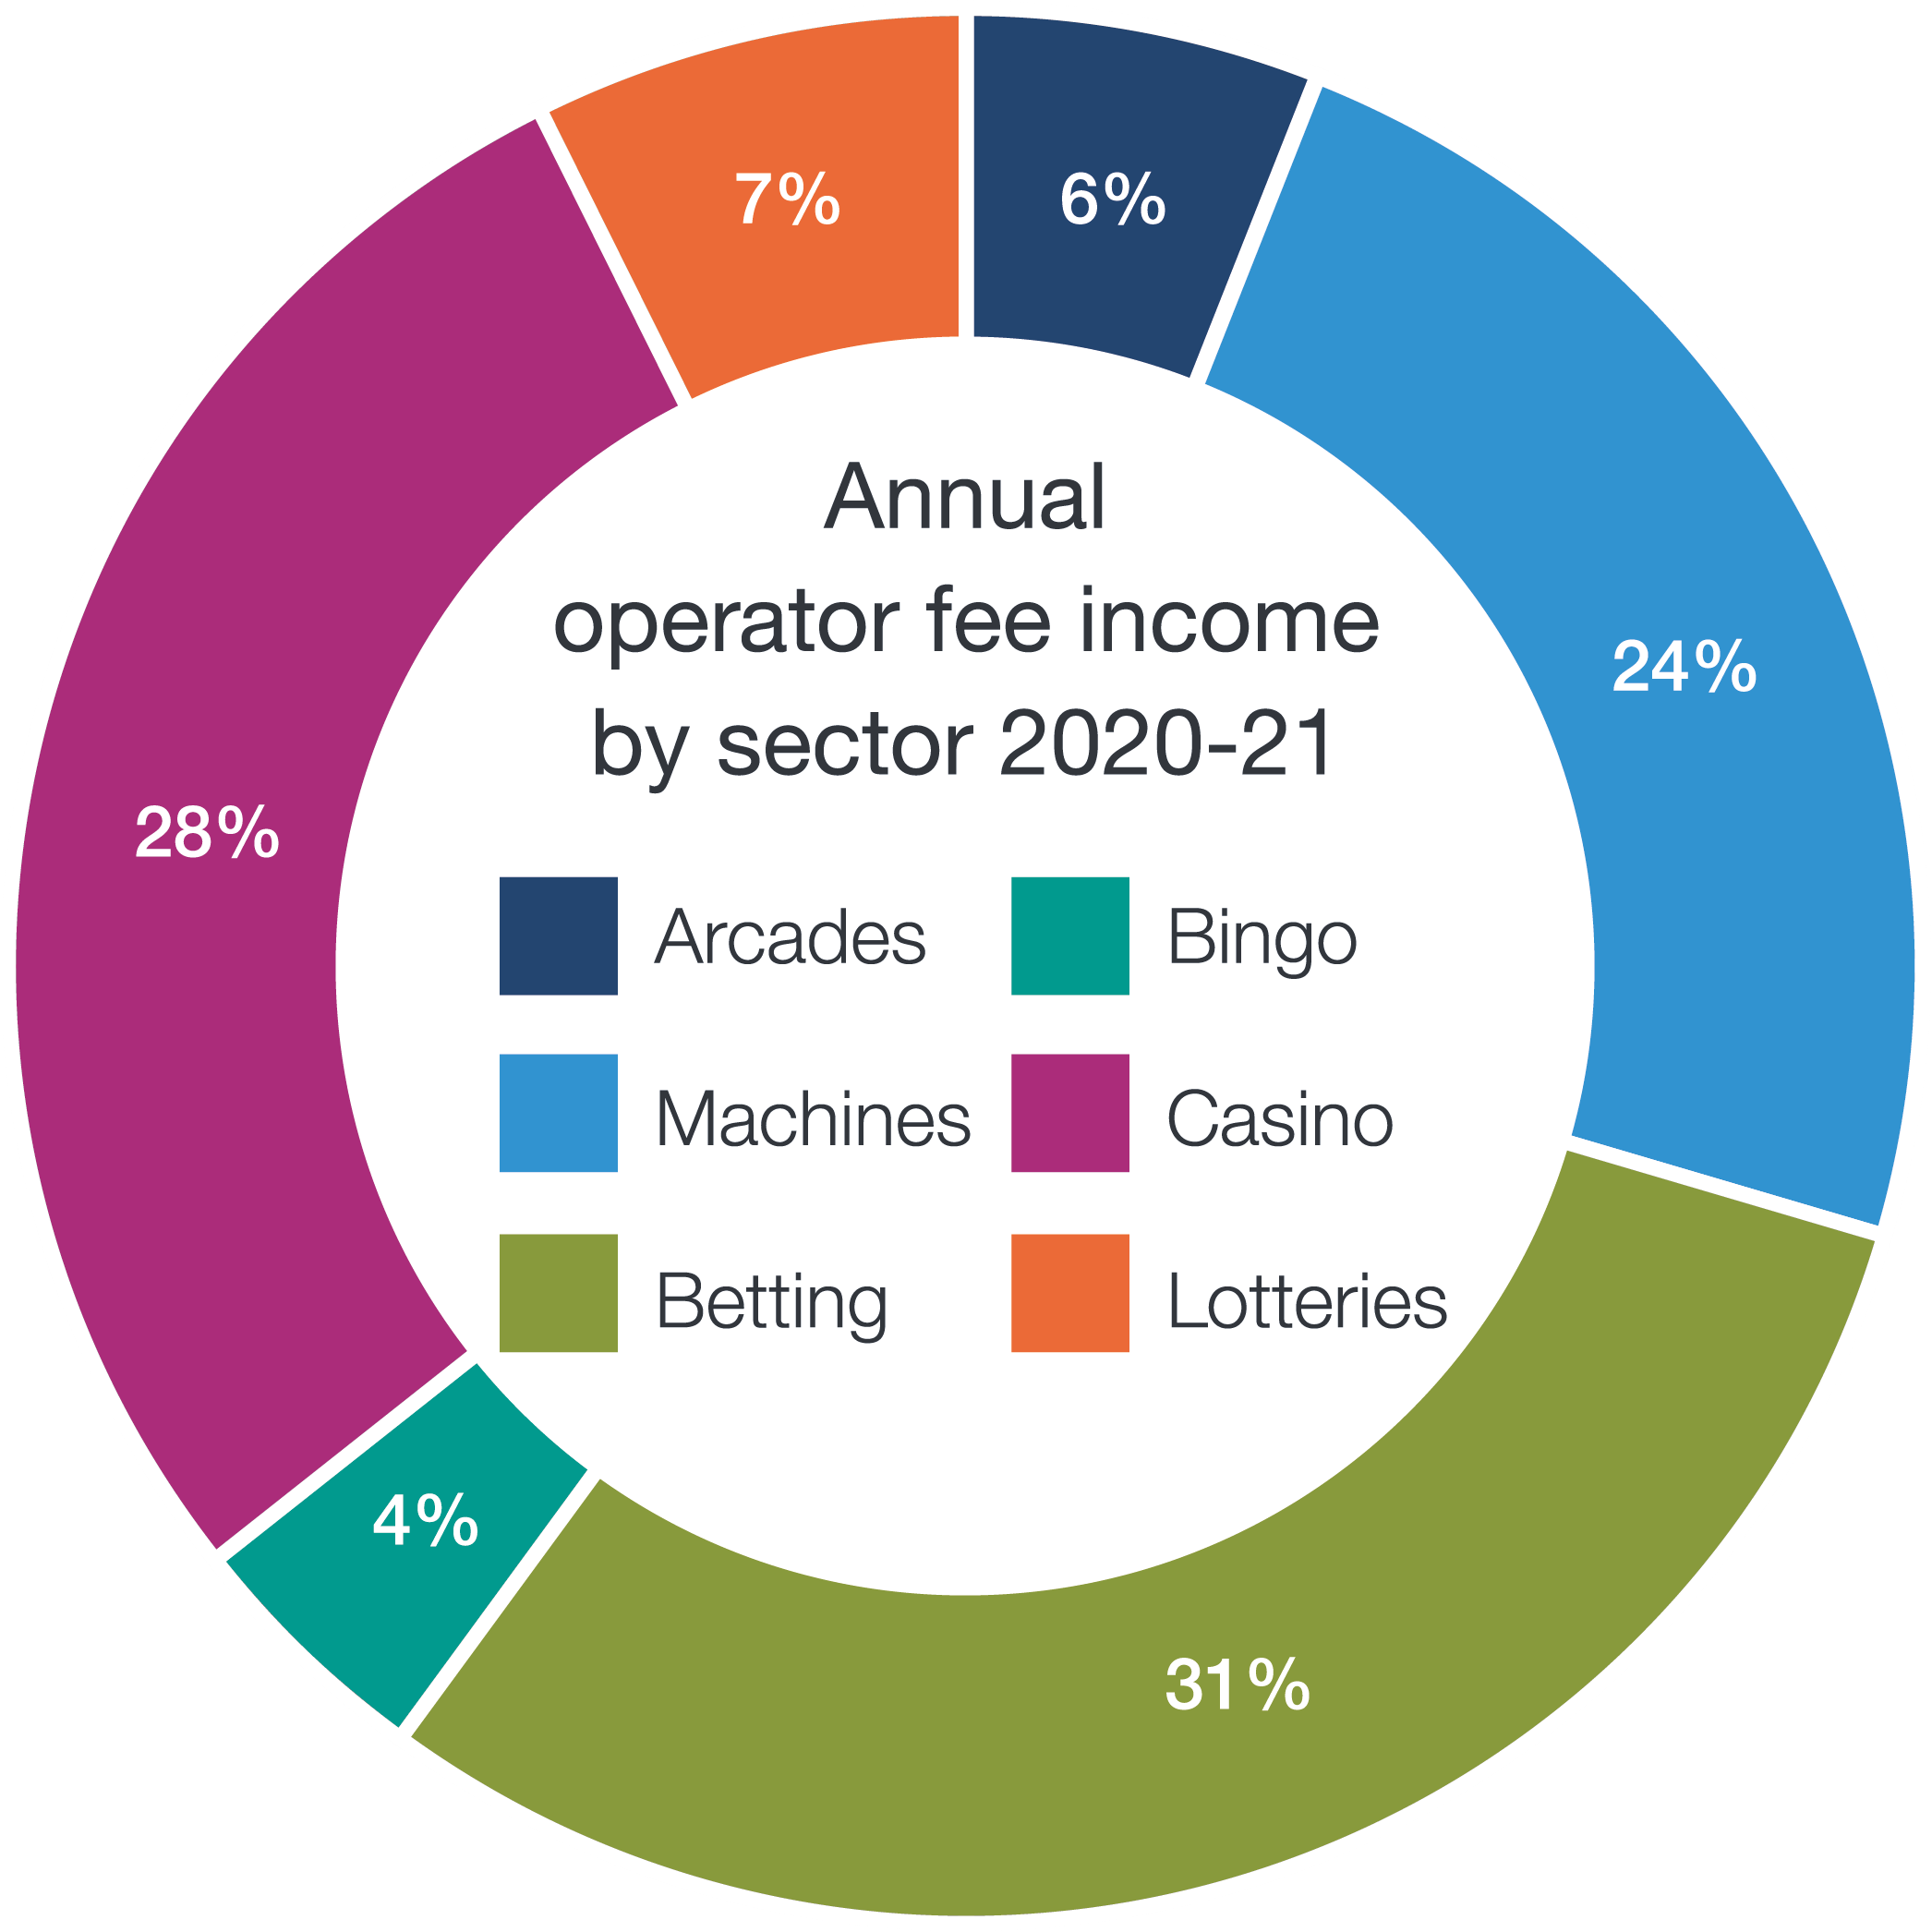 Annual operator fee income by sector 2020-21